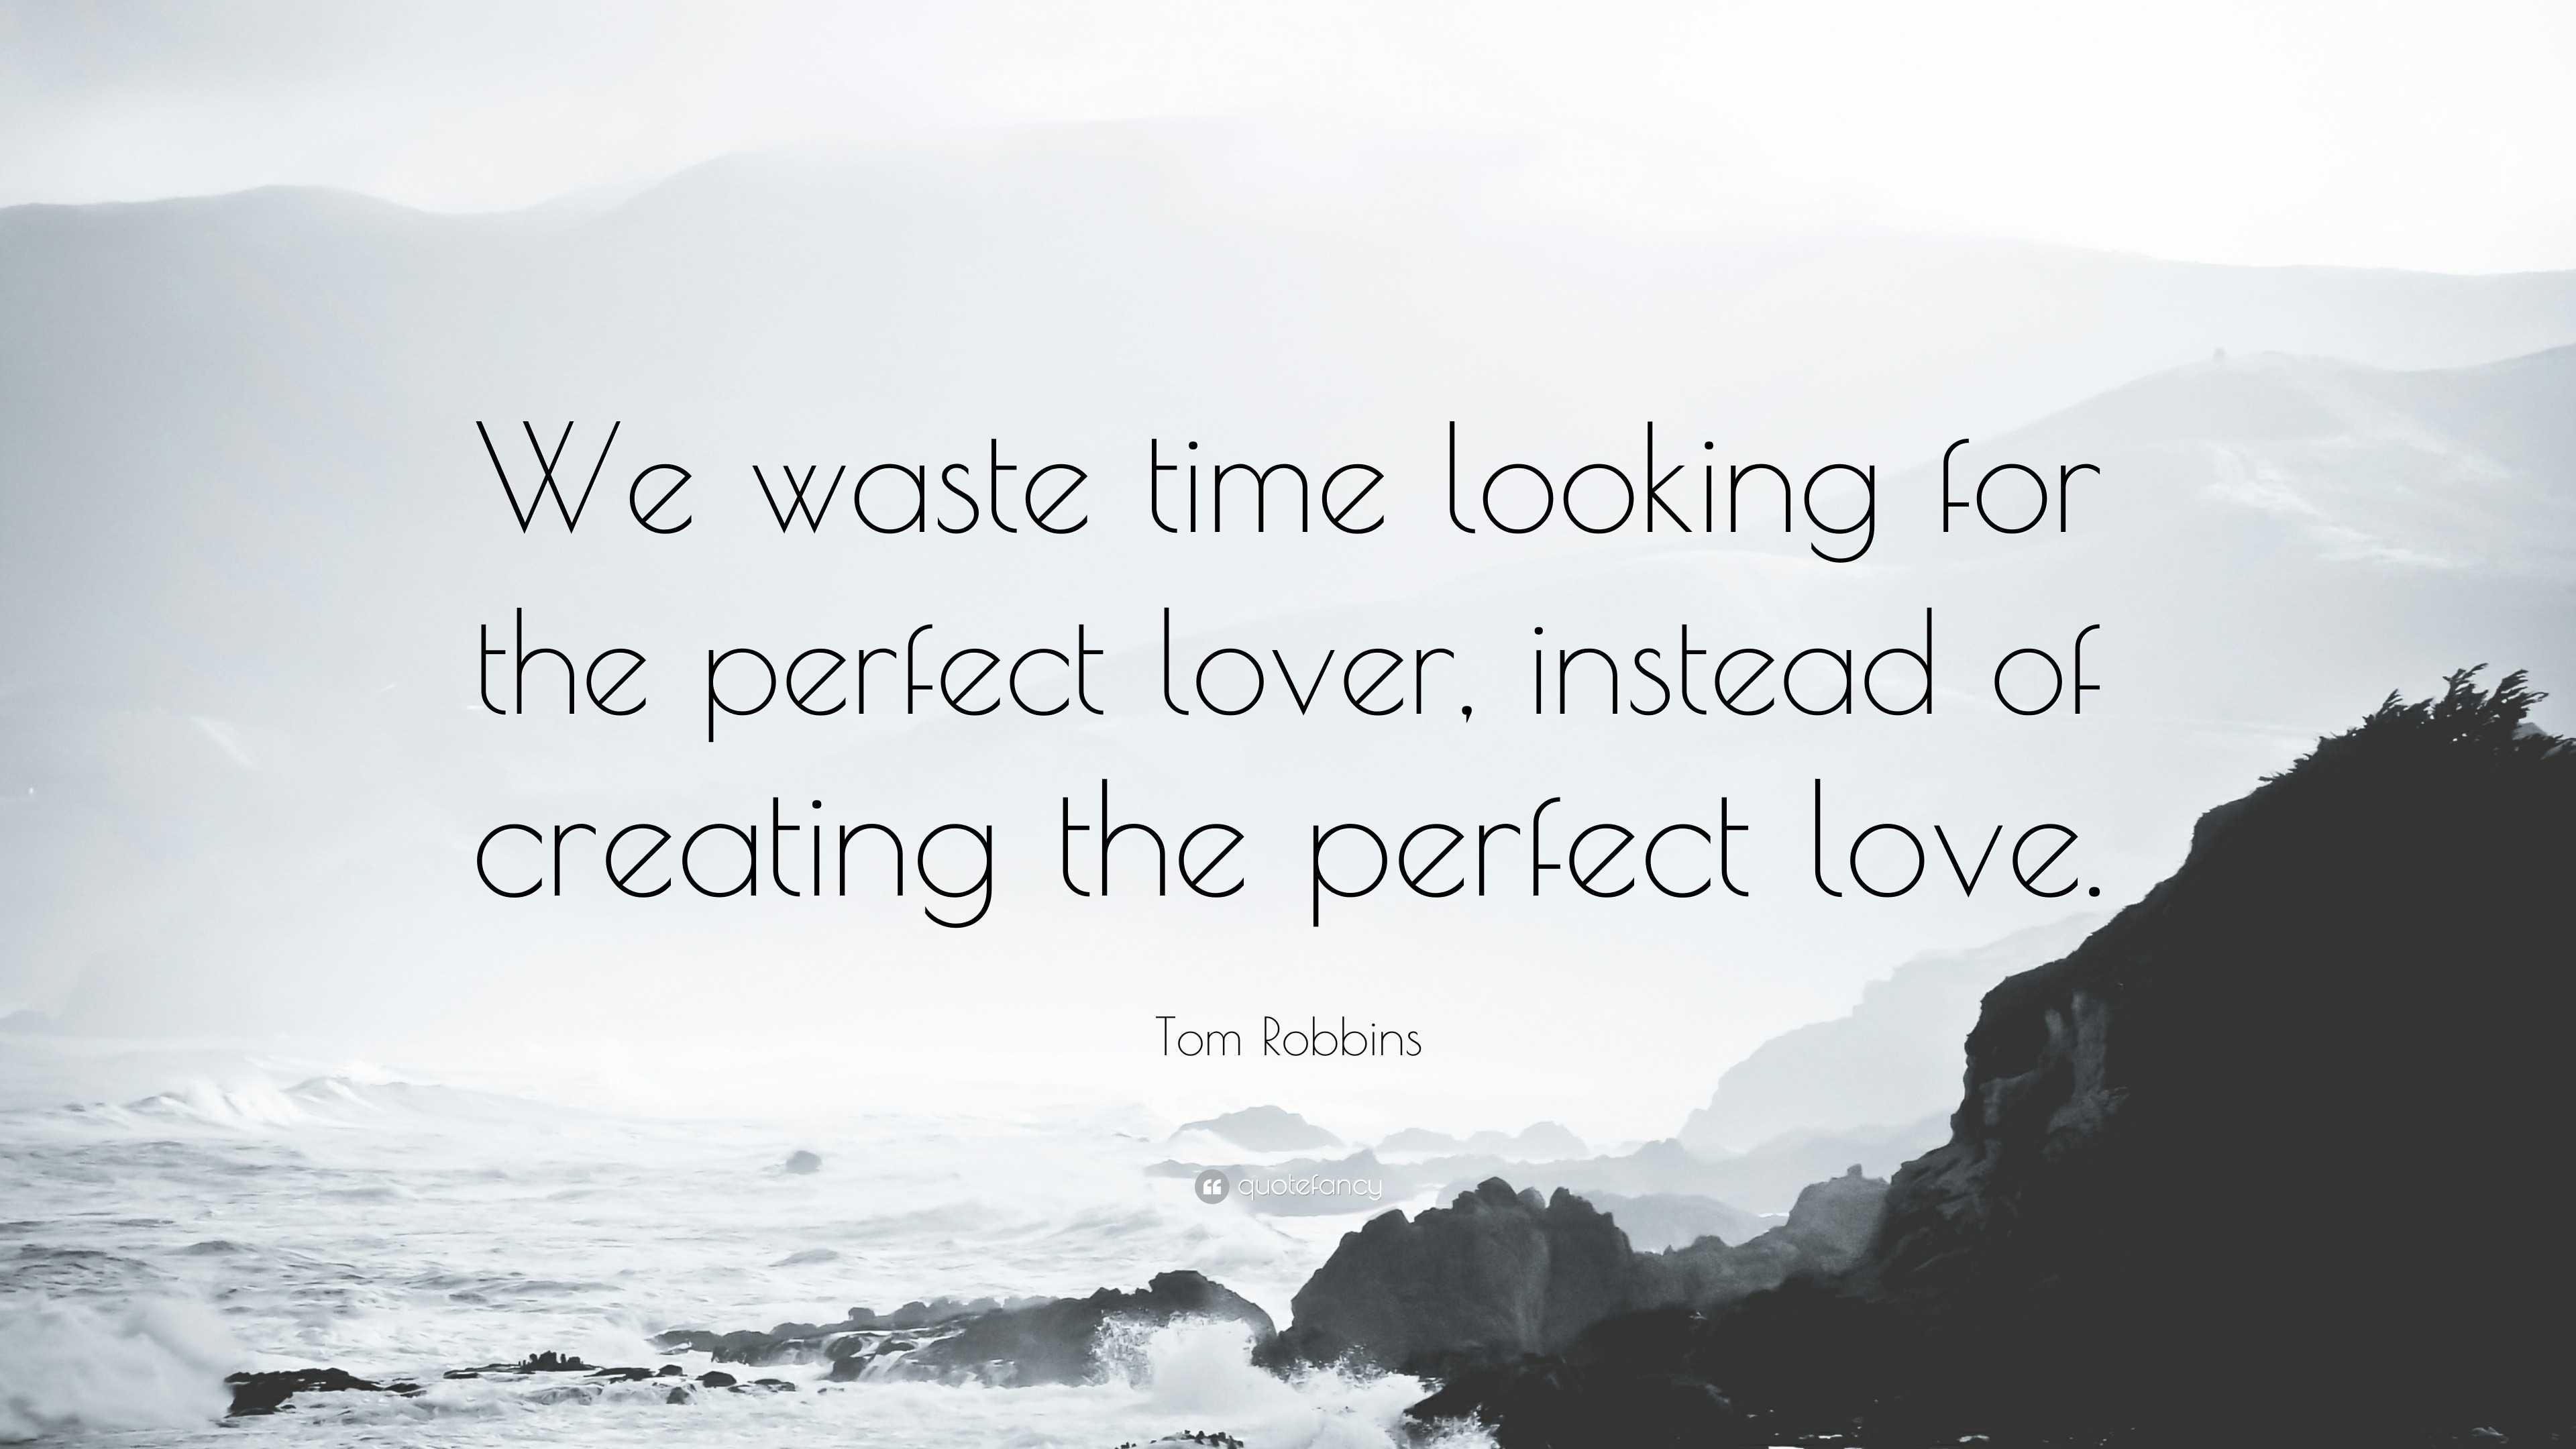 Tom Robbins Quote “We waste time looking for the perfect lover instead of